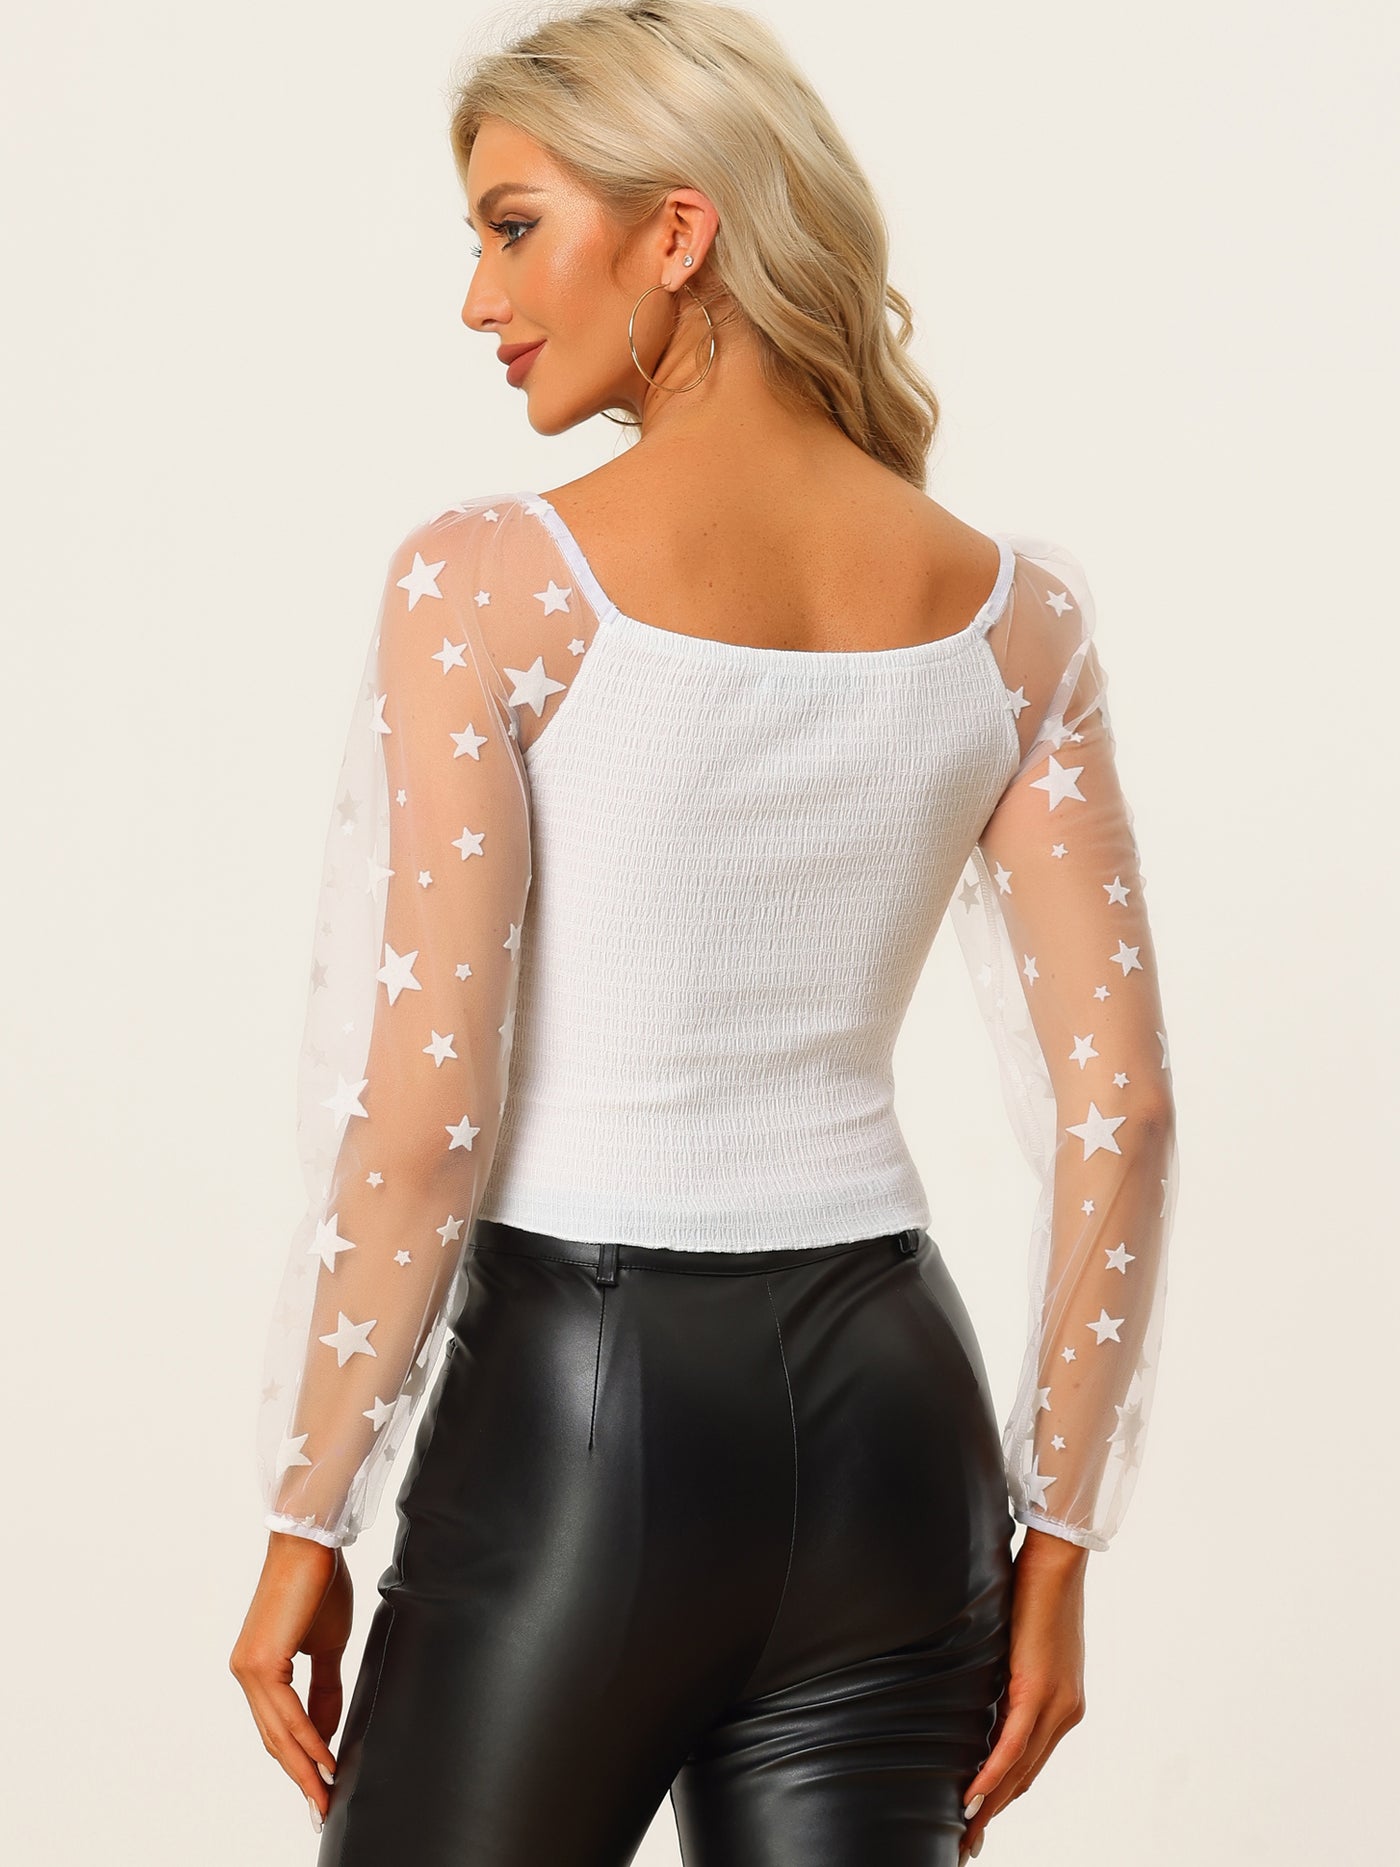 Allegra K Sheer Star Long Sleeve Square Neck Sexy Textured Gothic Crop Top